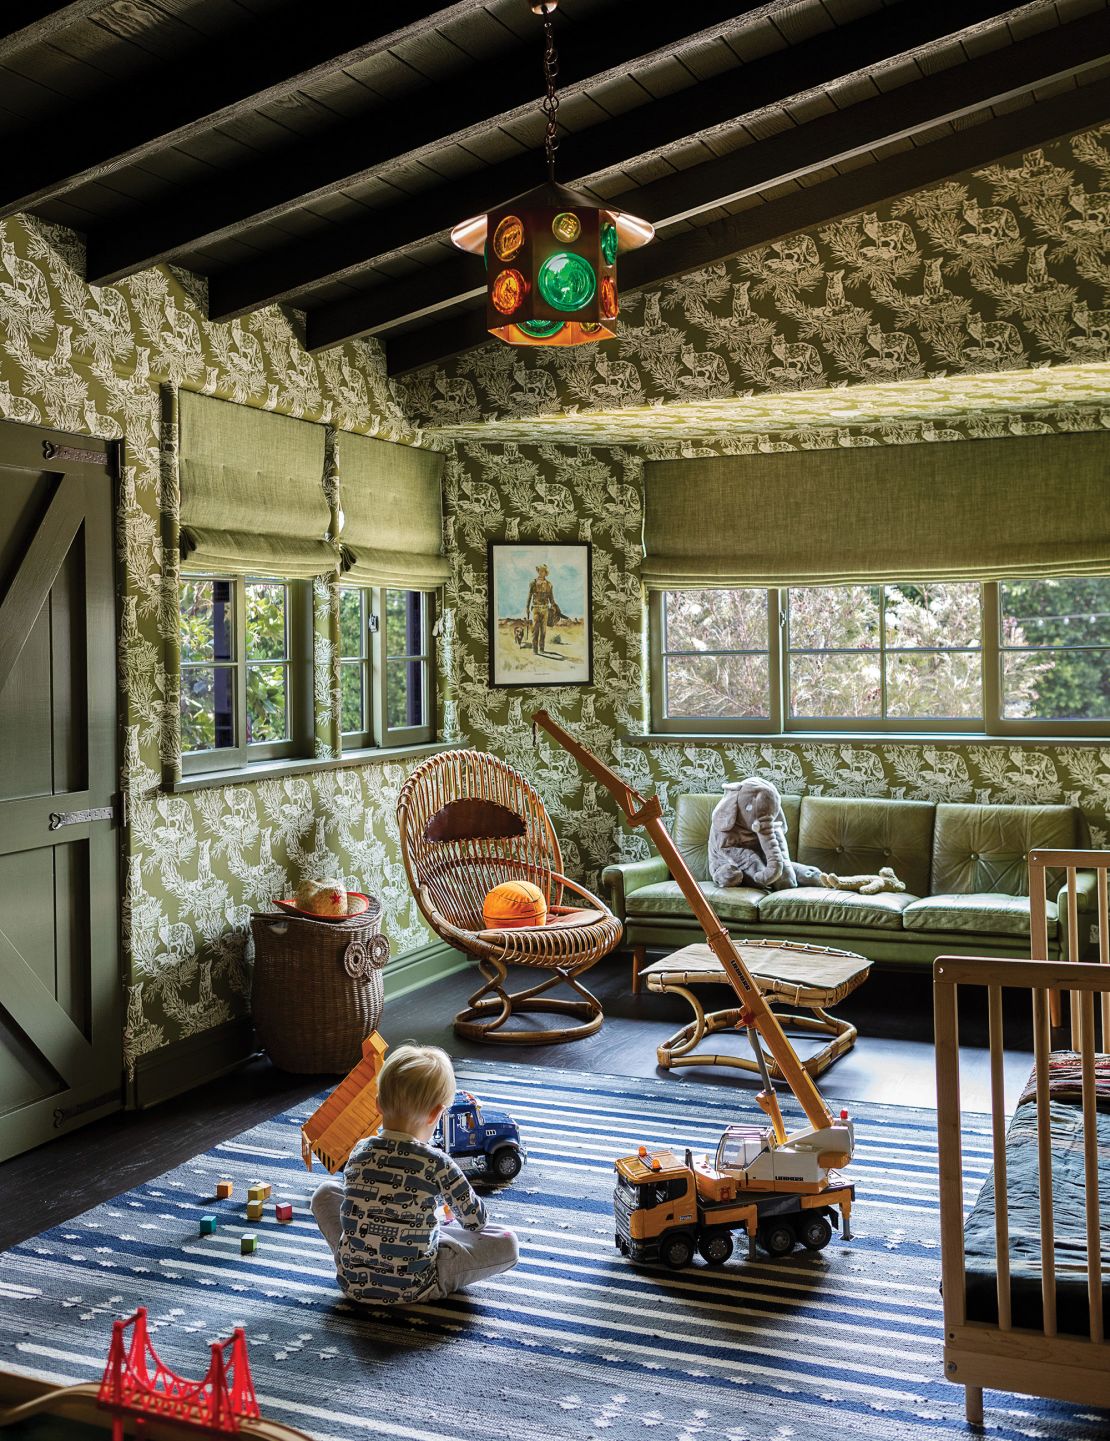 A plush, velvet couch adds comfort to Dunst's verdant nursery.